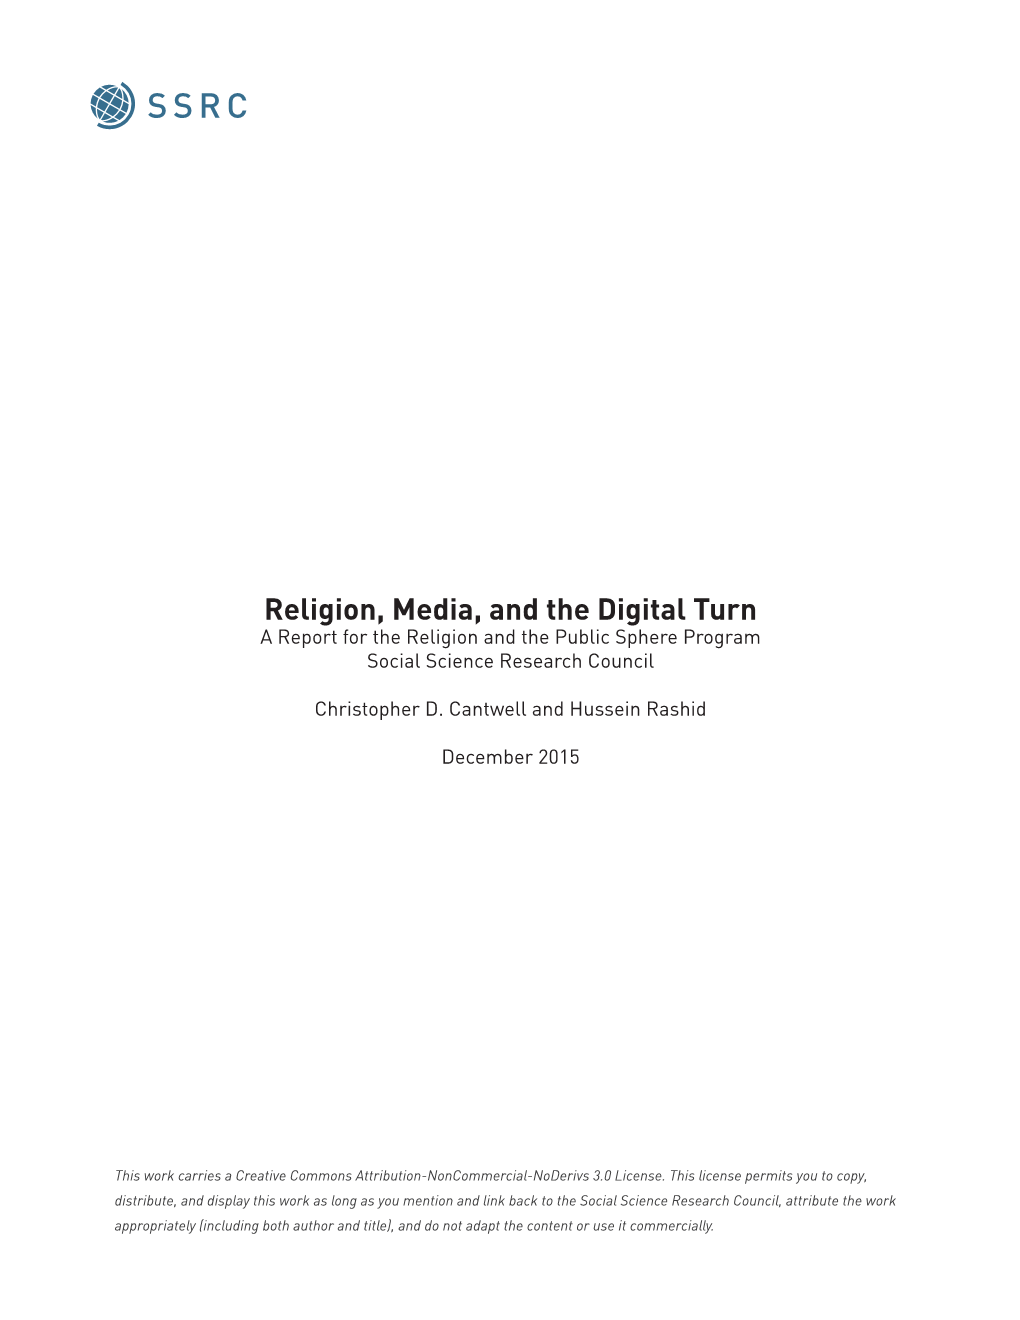 Religion, Media, and the Digital Turn a Report for the Religion and the Public Sphere Program Social Science Research Council